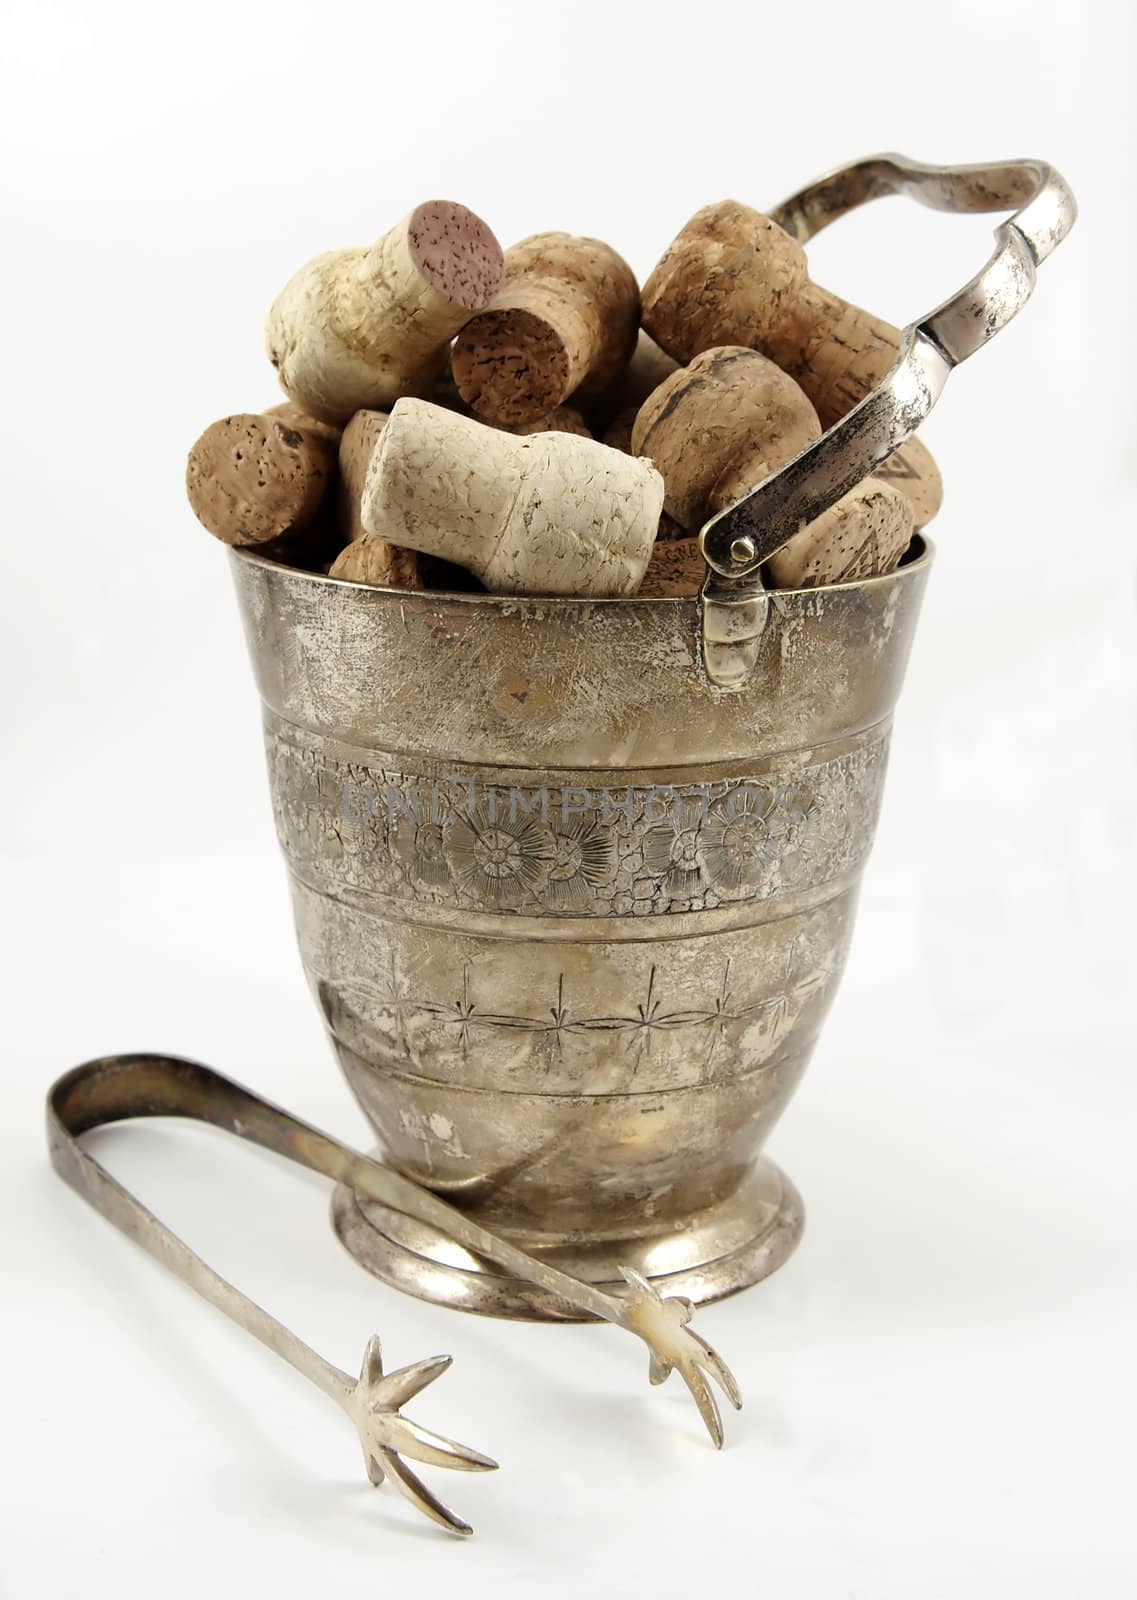 Ice tongs in front of bucket with champagne corks